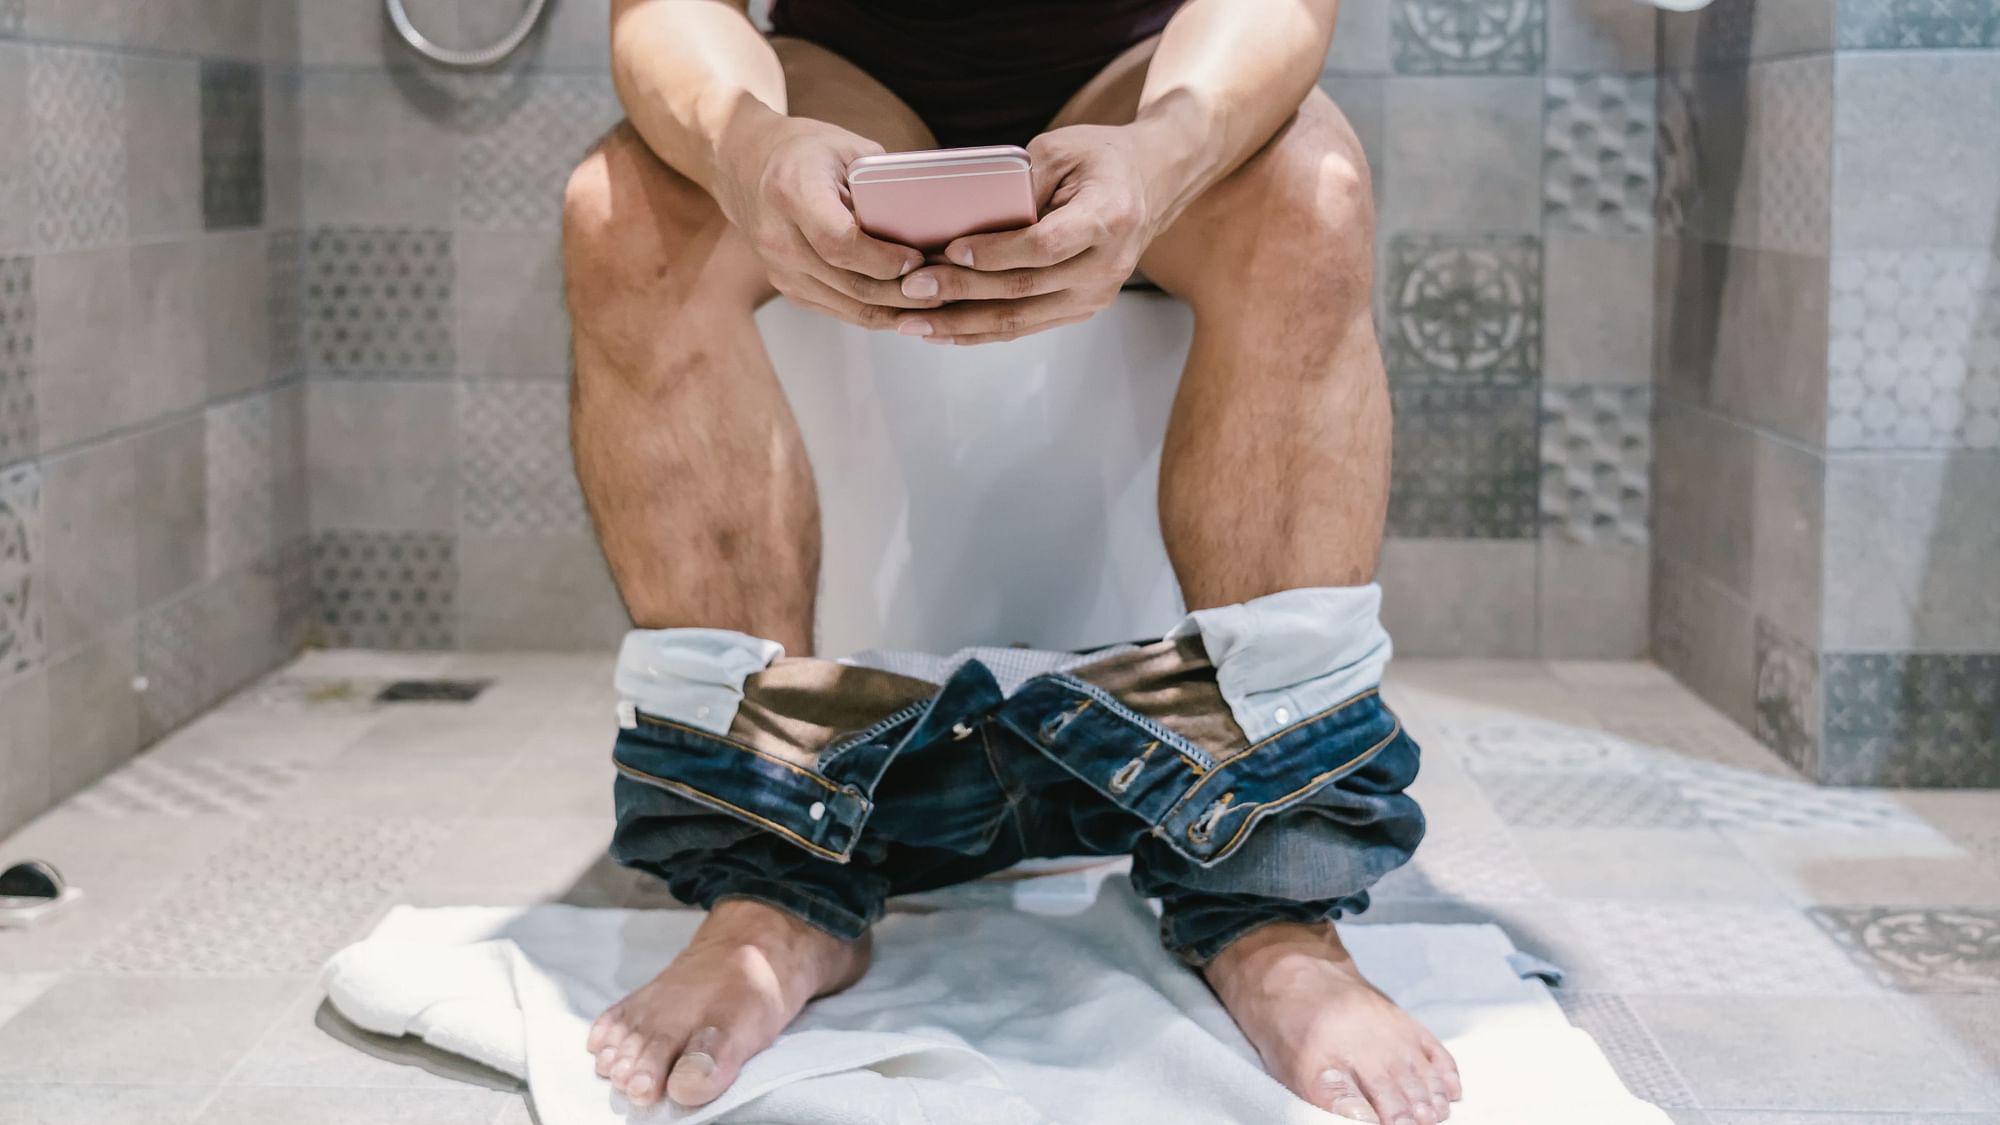 Using smartphone in the washroom can cause piles&nbsp;